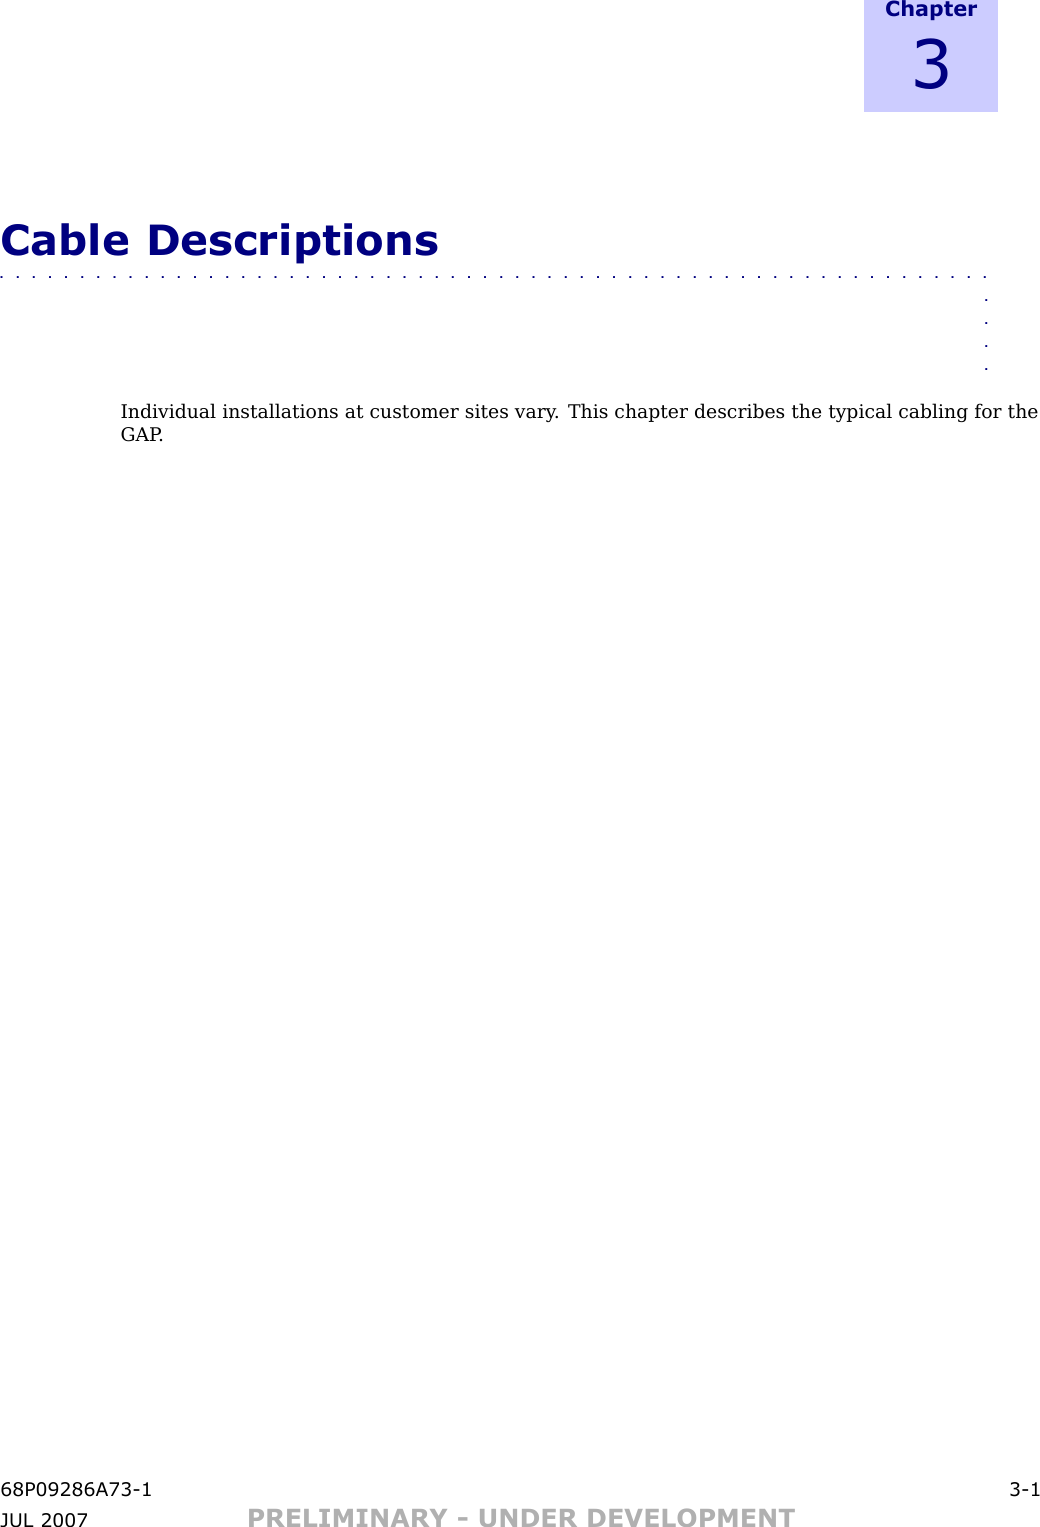 C h a p t e r3Cable Descriptions■■■■■■■■■■■■■■■■■■■■■■■■■■■■■■■■■■■■■■■■■■■■■■■■■■■■■■■■■■■■■■■■■■Individual installations at customer sites vary . This chapter describes the typical cabling for theGAP .68P09286A73 -1 3 -1JUL 2007 PRELIMINARY - UNDER DEVELOPMENT